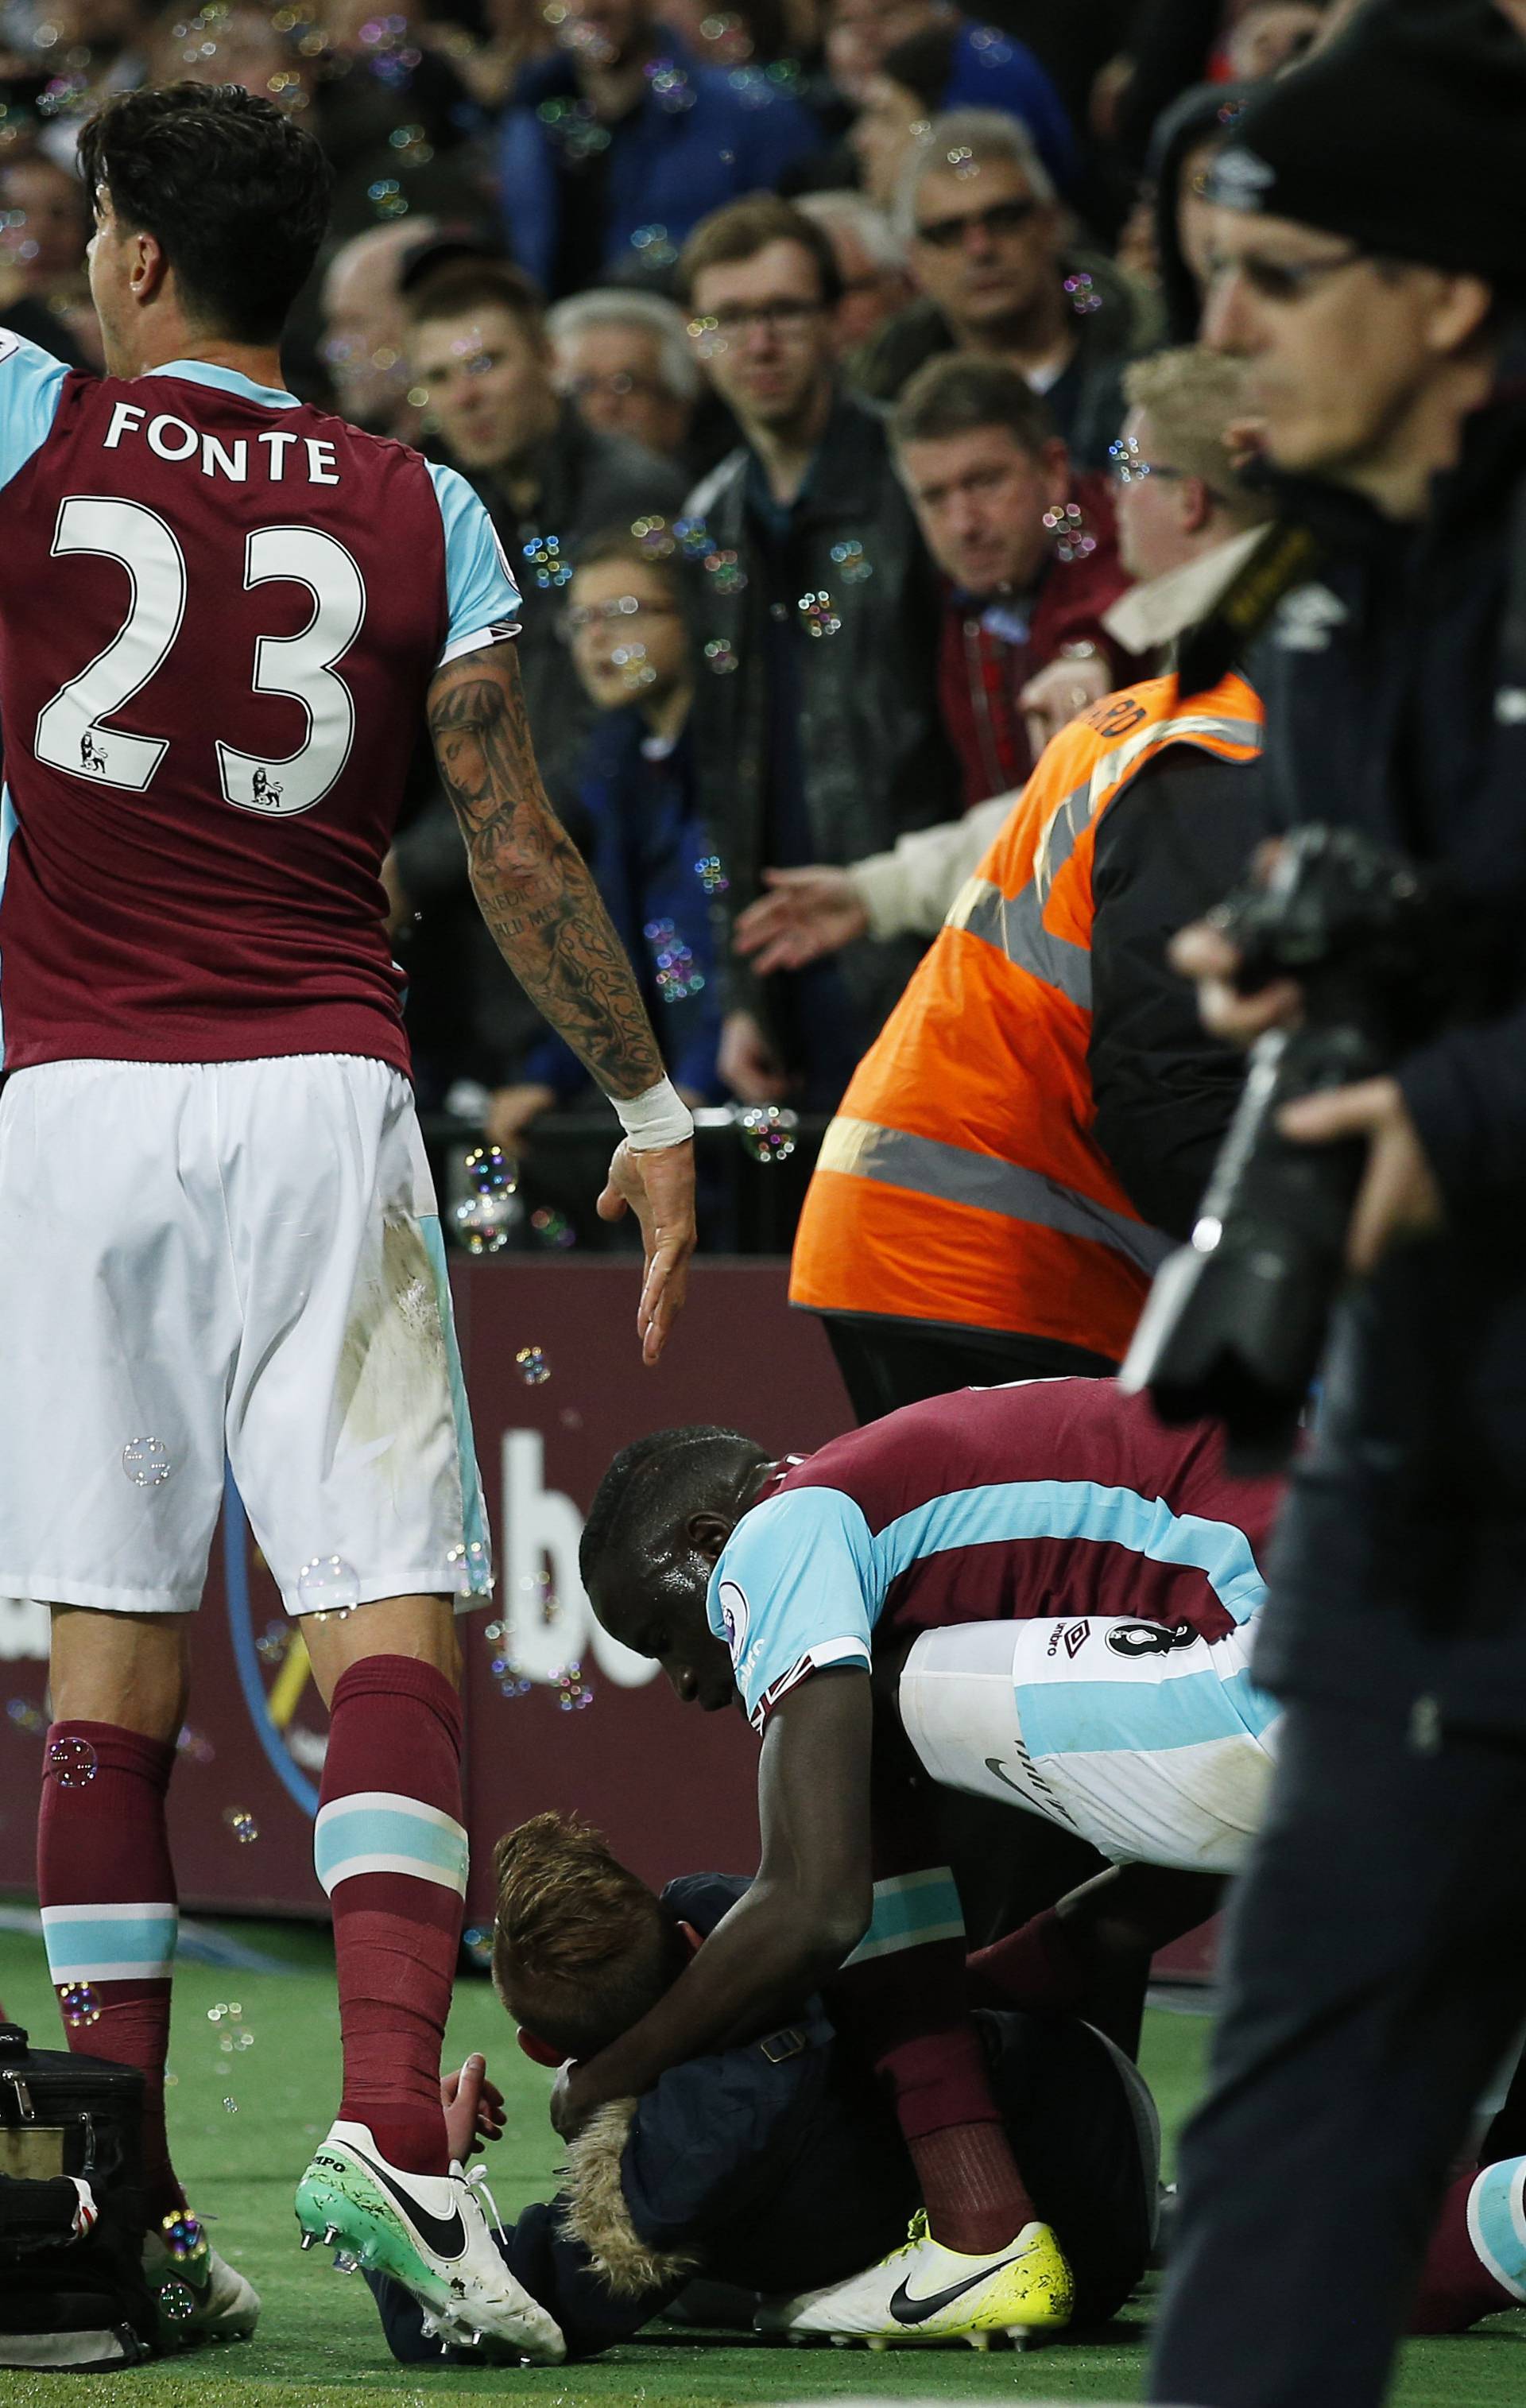 West Ham United's Cheikhou Kouyate with a fan after a barrier fell after West Ham United's Manuel Lanzini scored their first goal